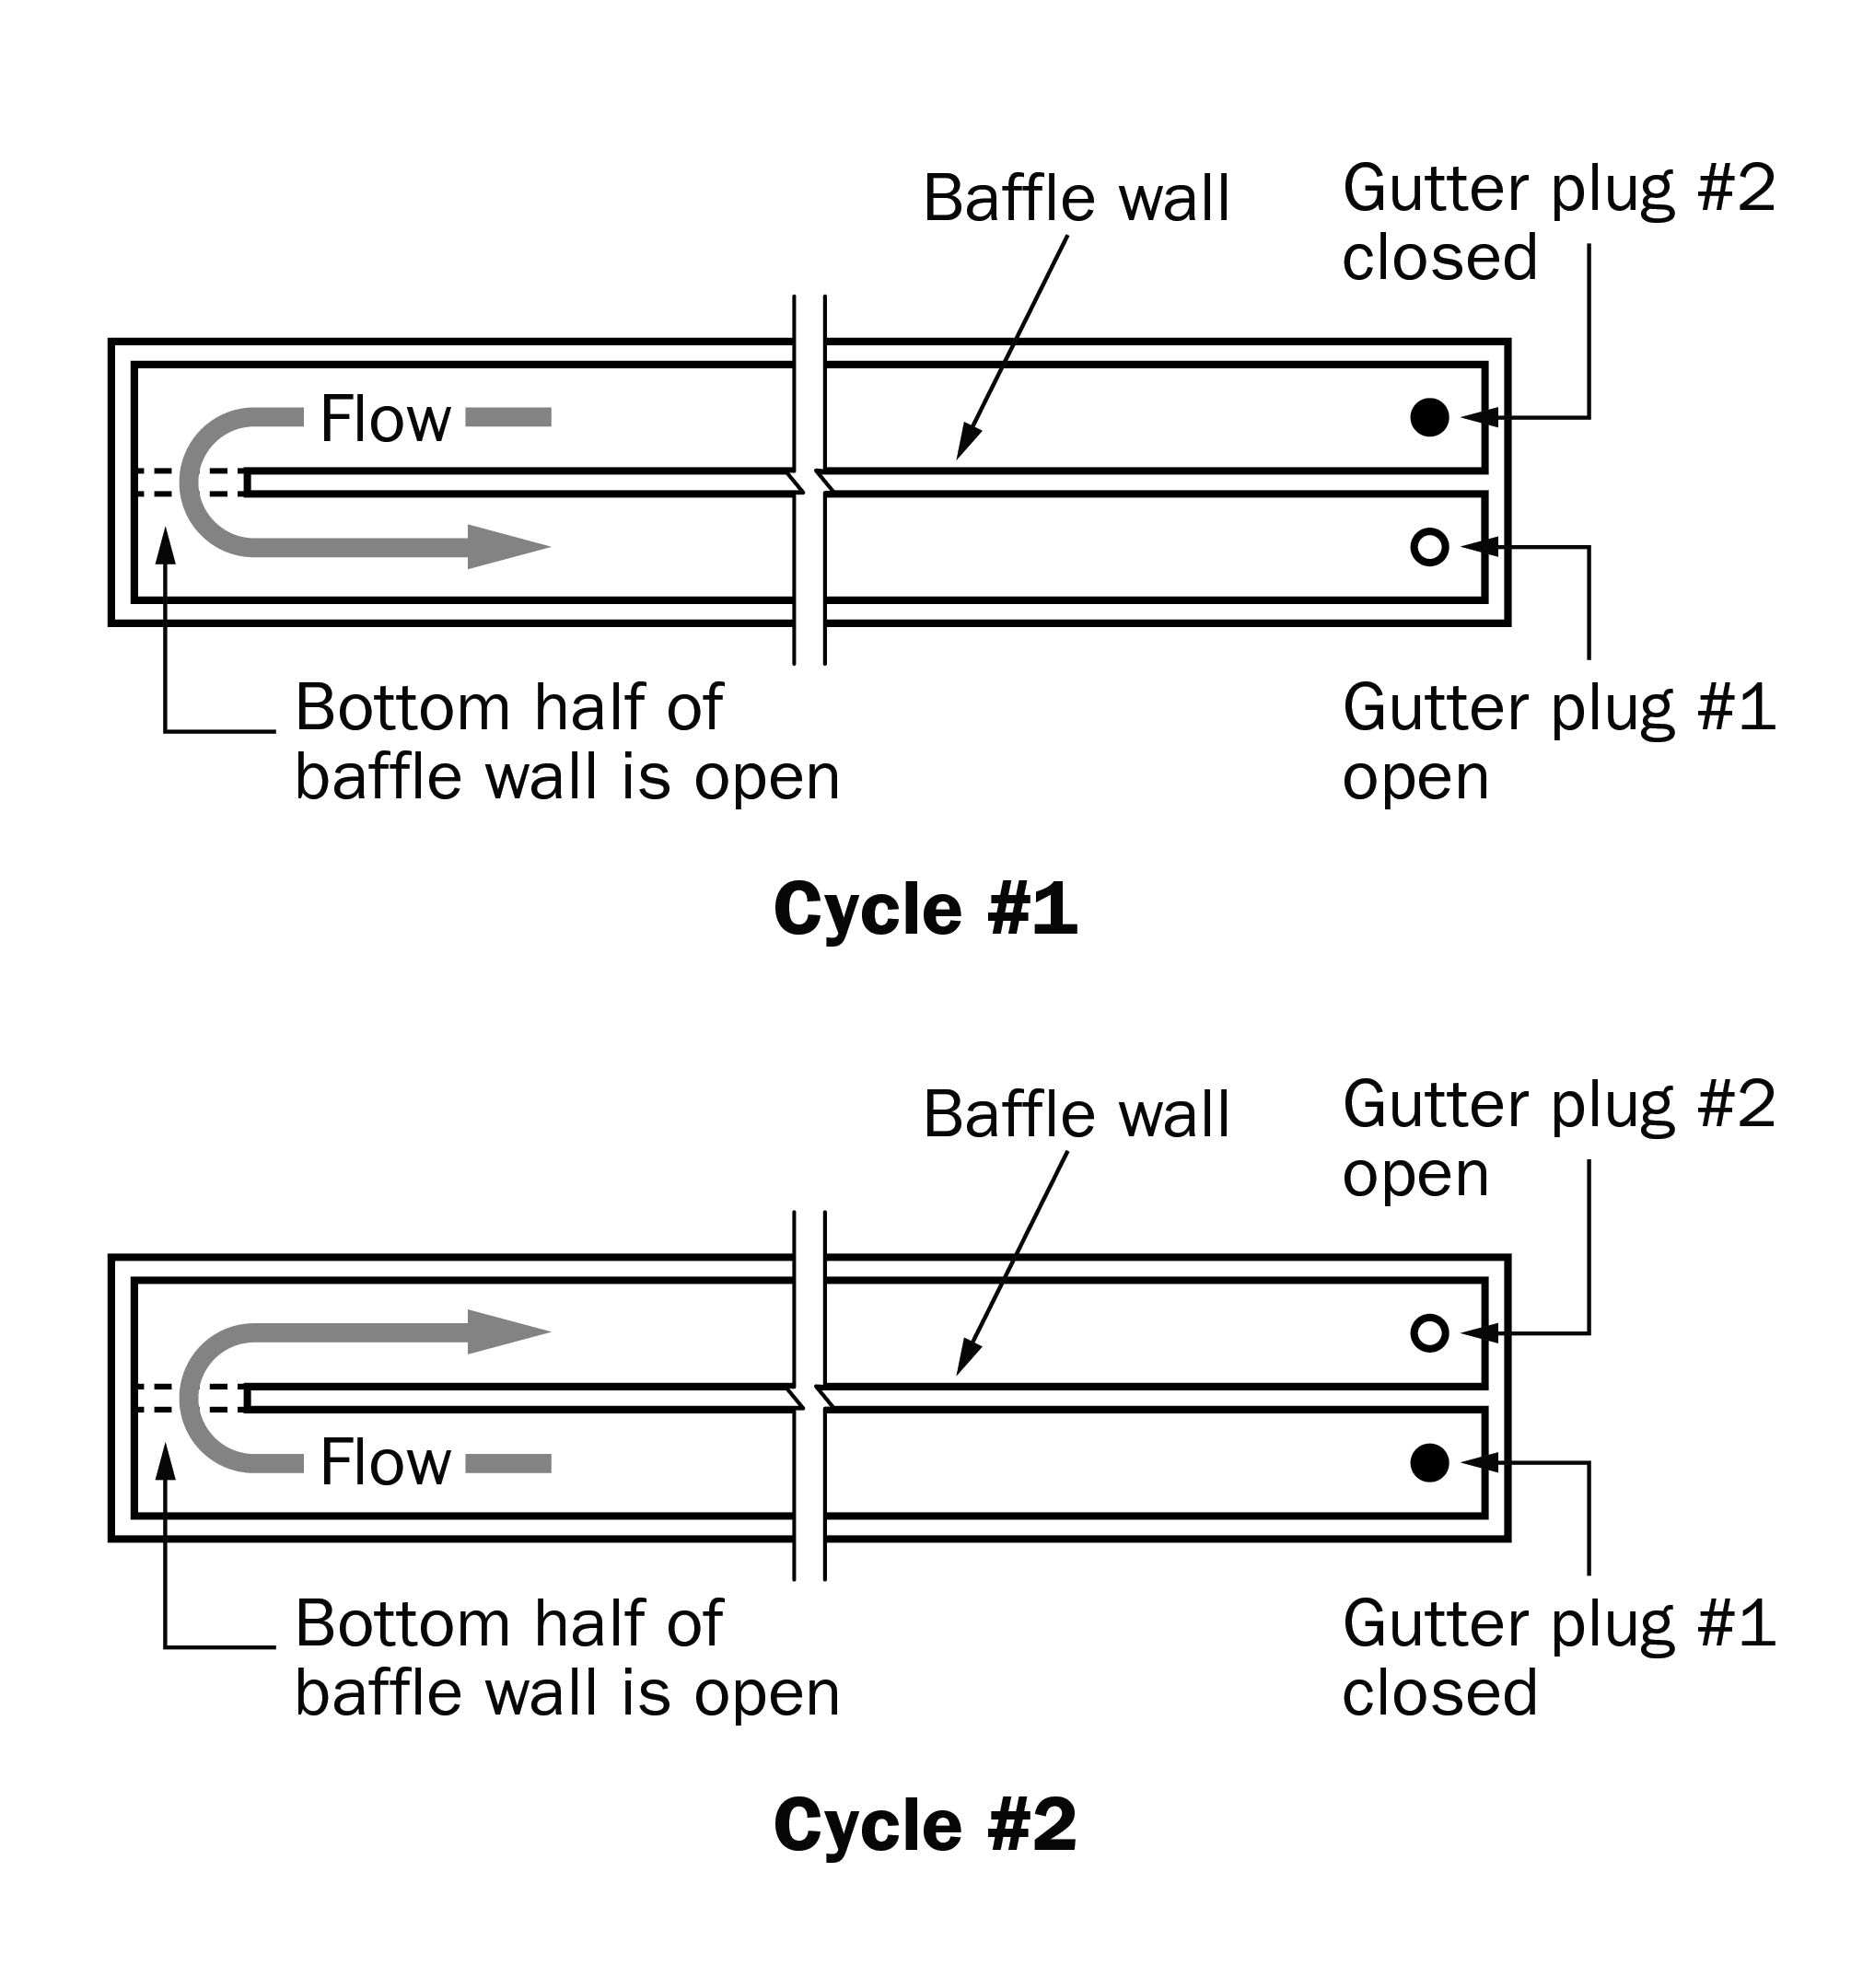 A drawing showing a plan view of a hairpin configuration gutter system that flushes manure by reversing direction of flow at the end of each cycle.